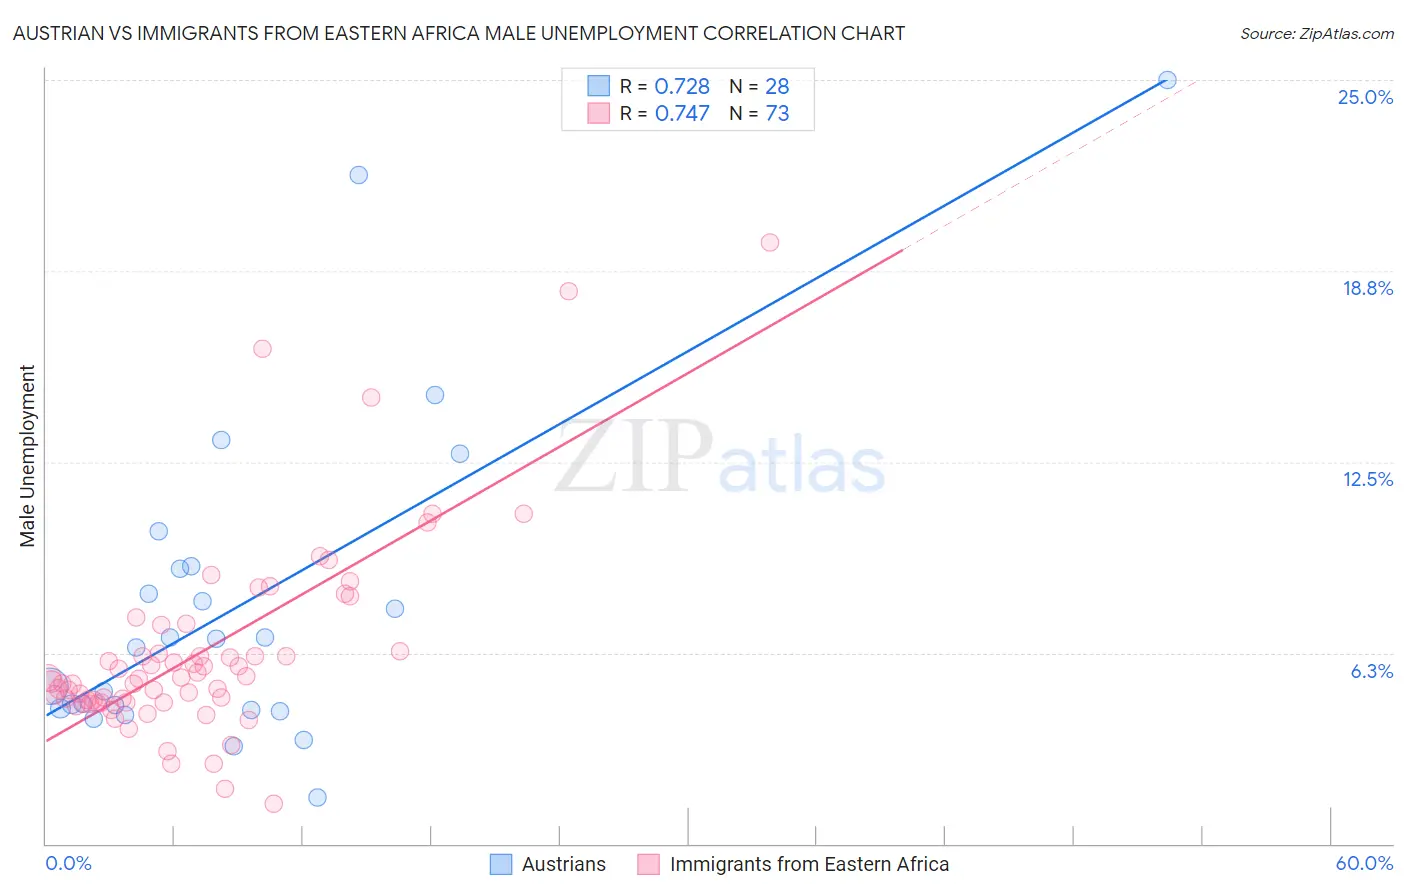 Austrian vs Immigrants from Eastern Africa Male Unemployment